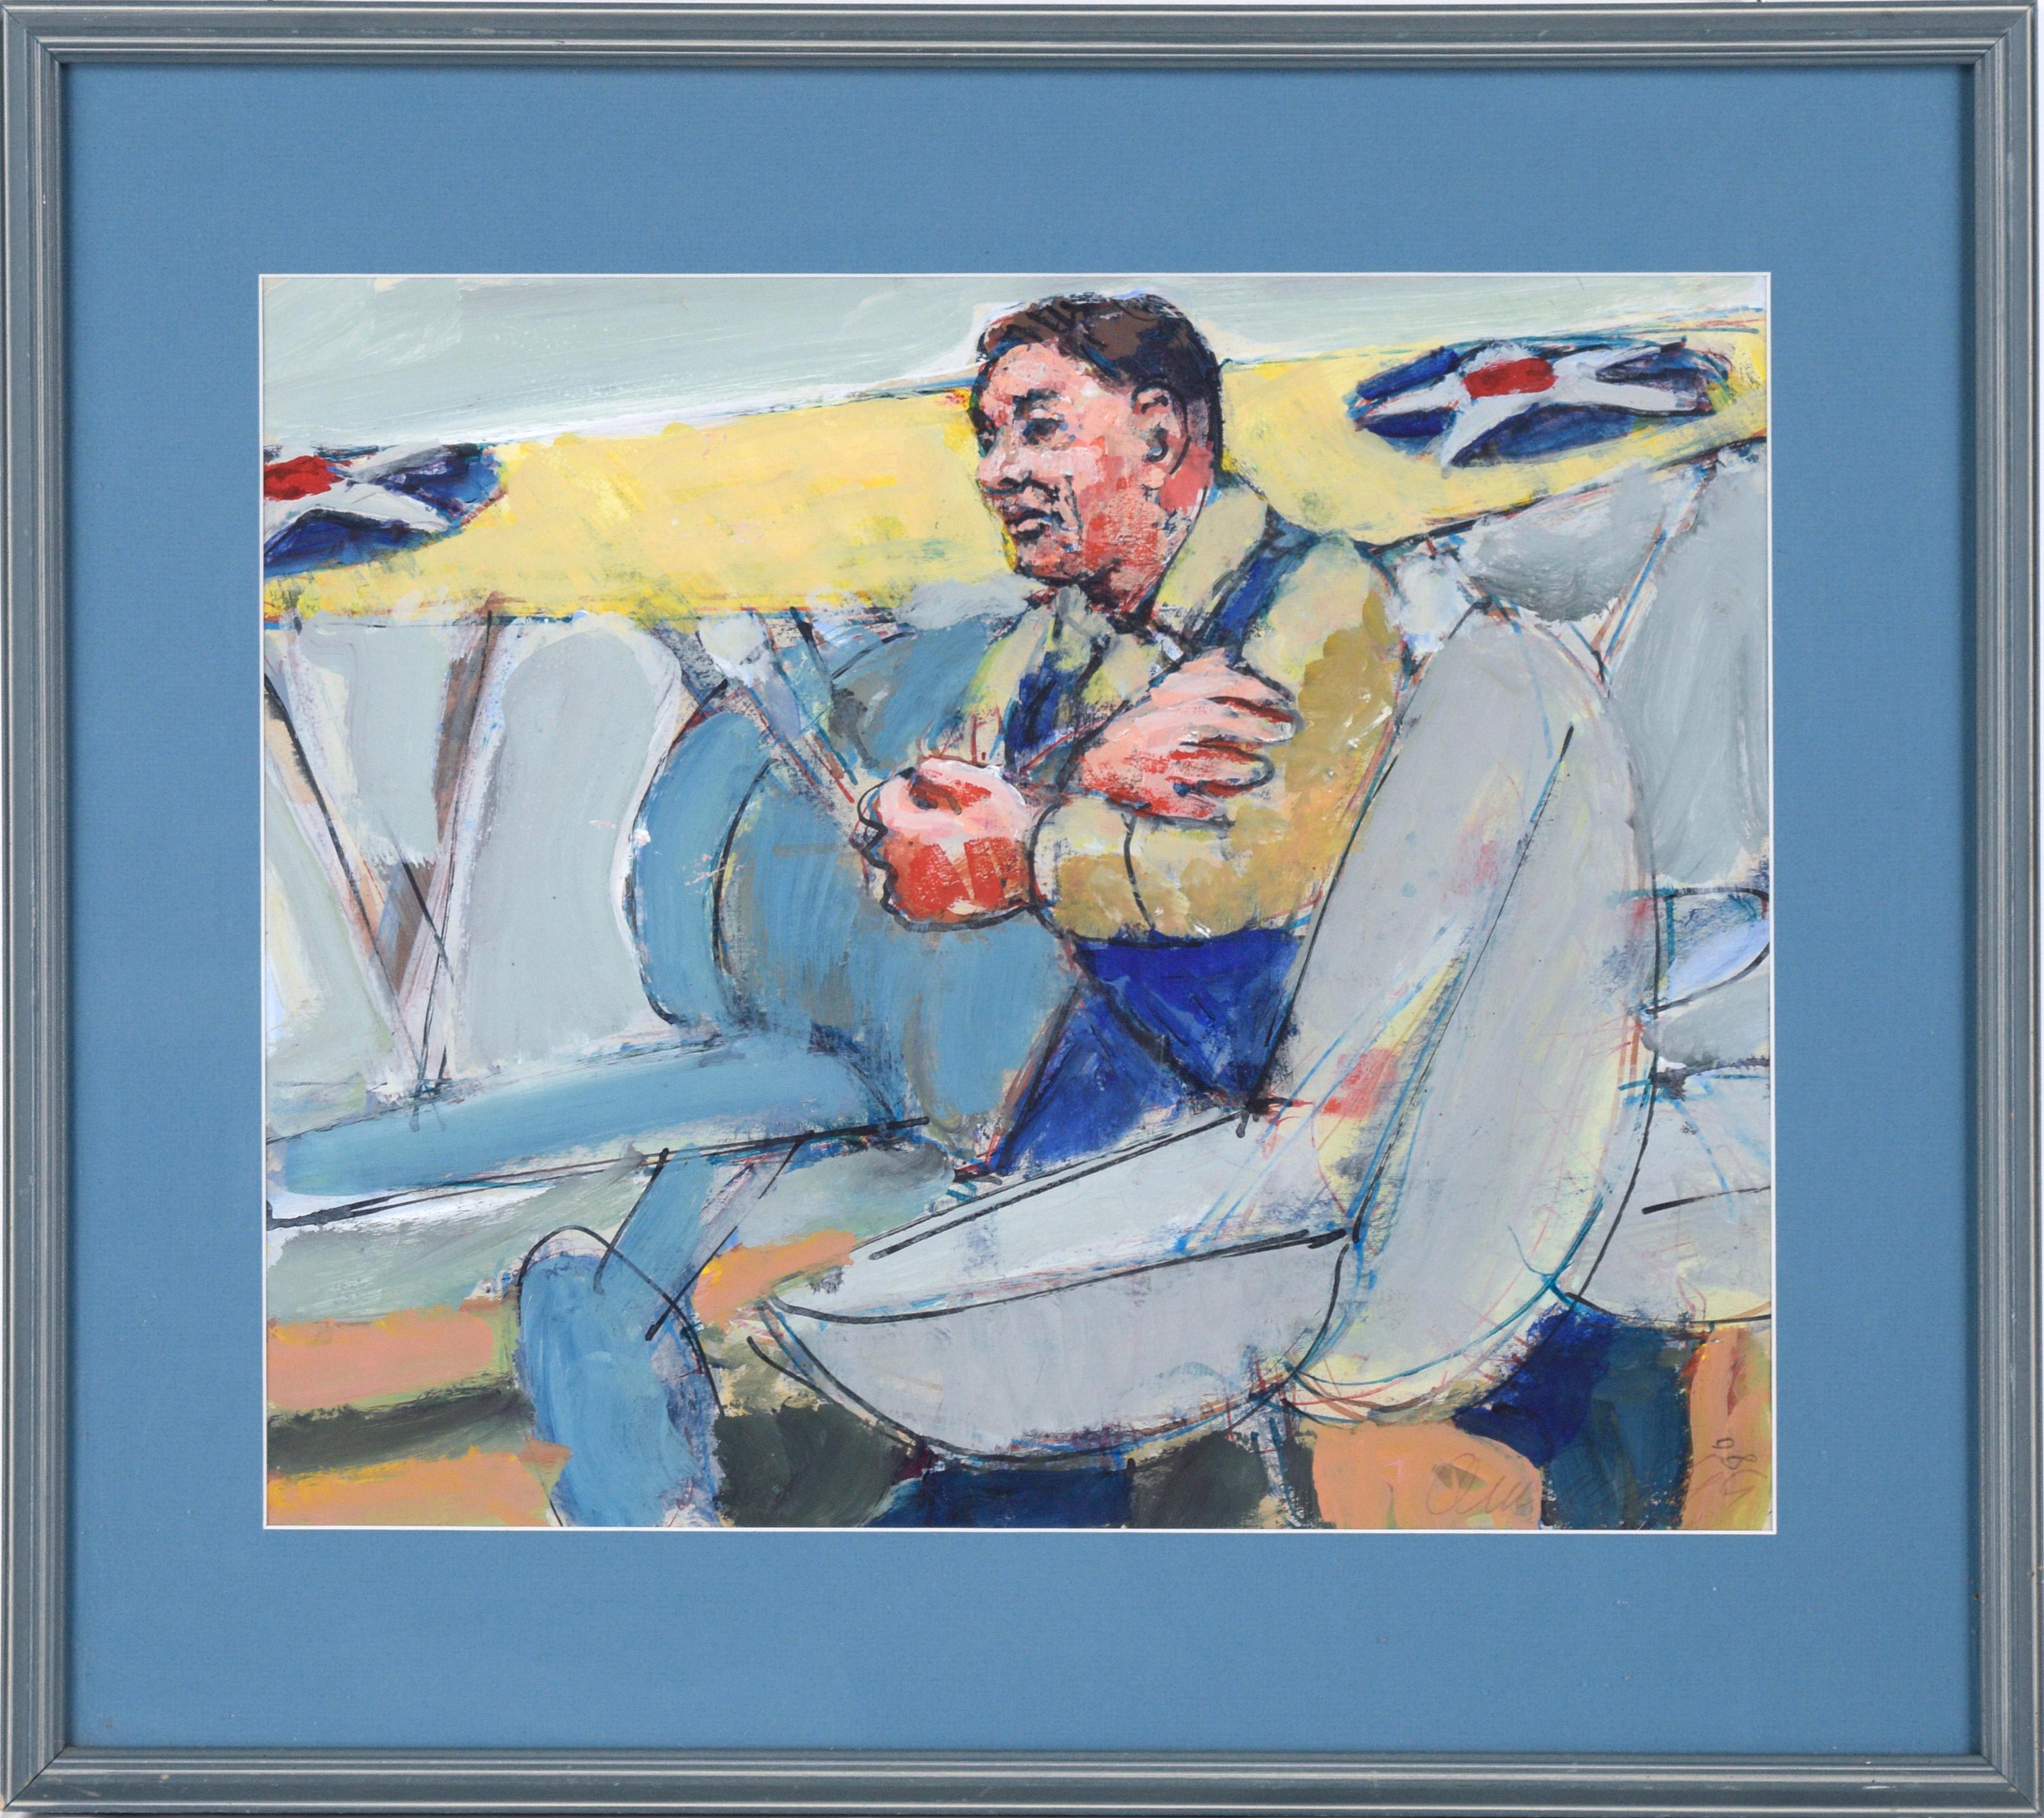 David Amland Figurative Painting - Pilots and WWII Airplanes - Double-sided Figurative Composition in Oil on Paper